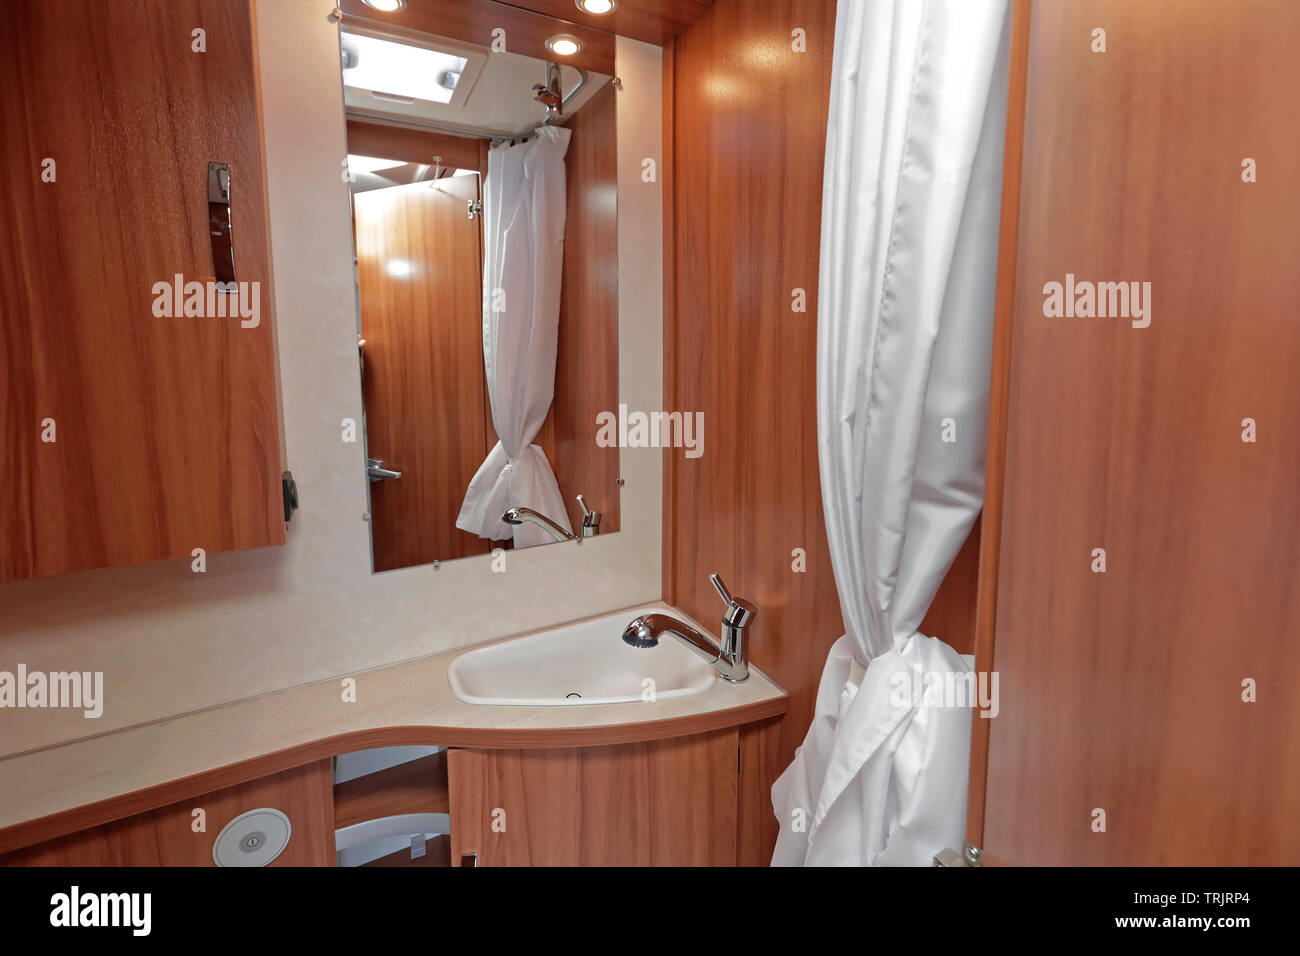 Camper Van Wooden Bathroom With Shower Curtain Stock Photo - Alamy